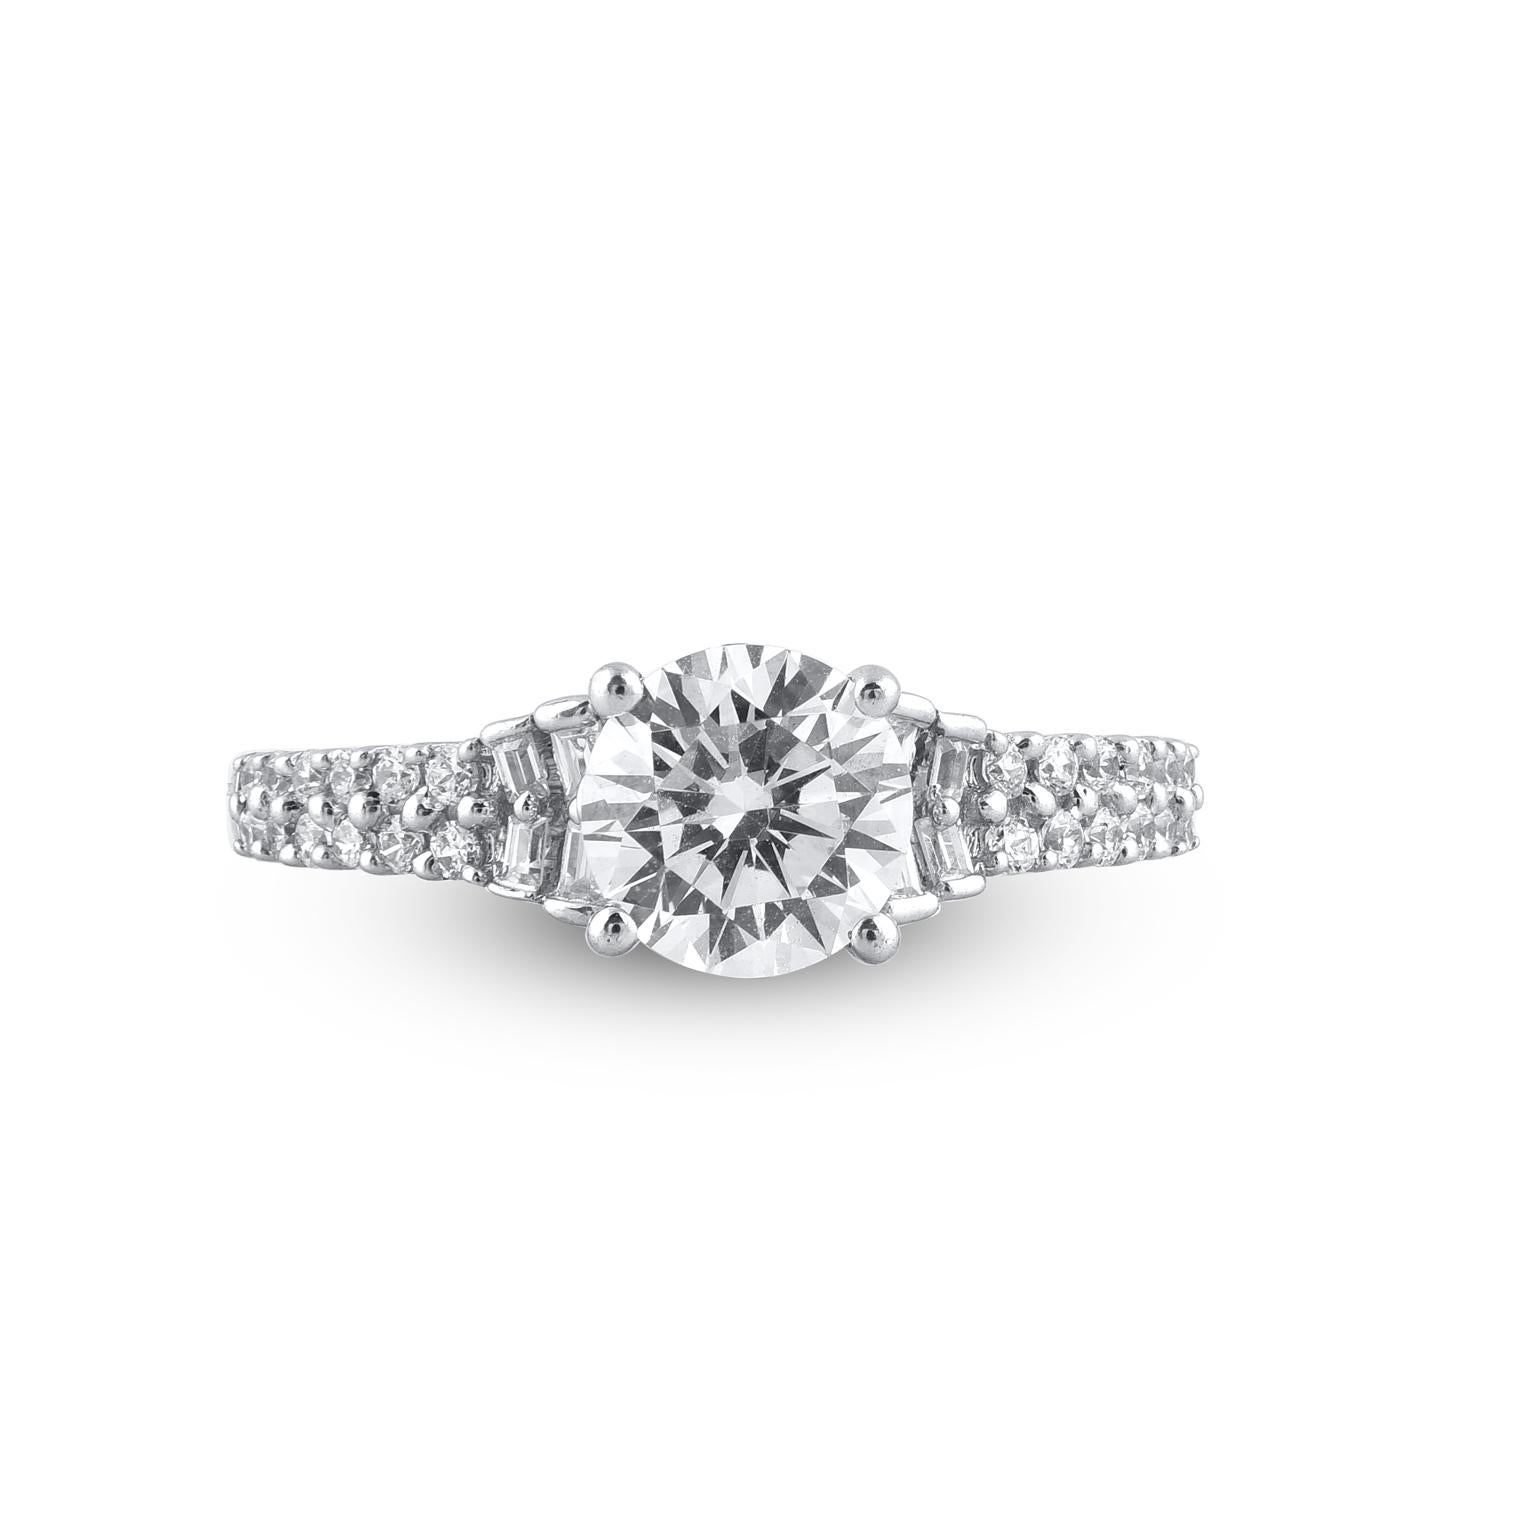 A graceful addition to her wardrobe, this design crafted in 14 Karat white gold and it's features 33 round brilliant cut and baguette cut diamond set in prong and half channel setting. Total diamond weight is 1.25 carat. The diamond are natural, not